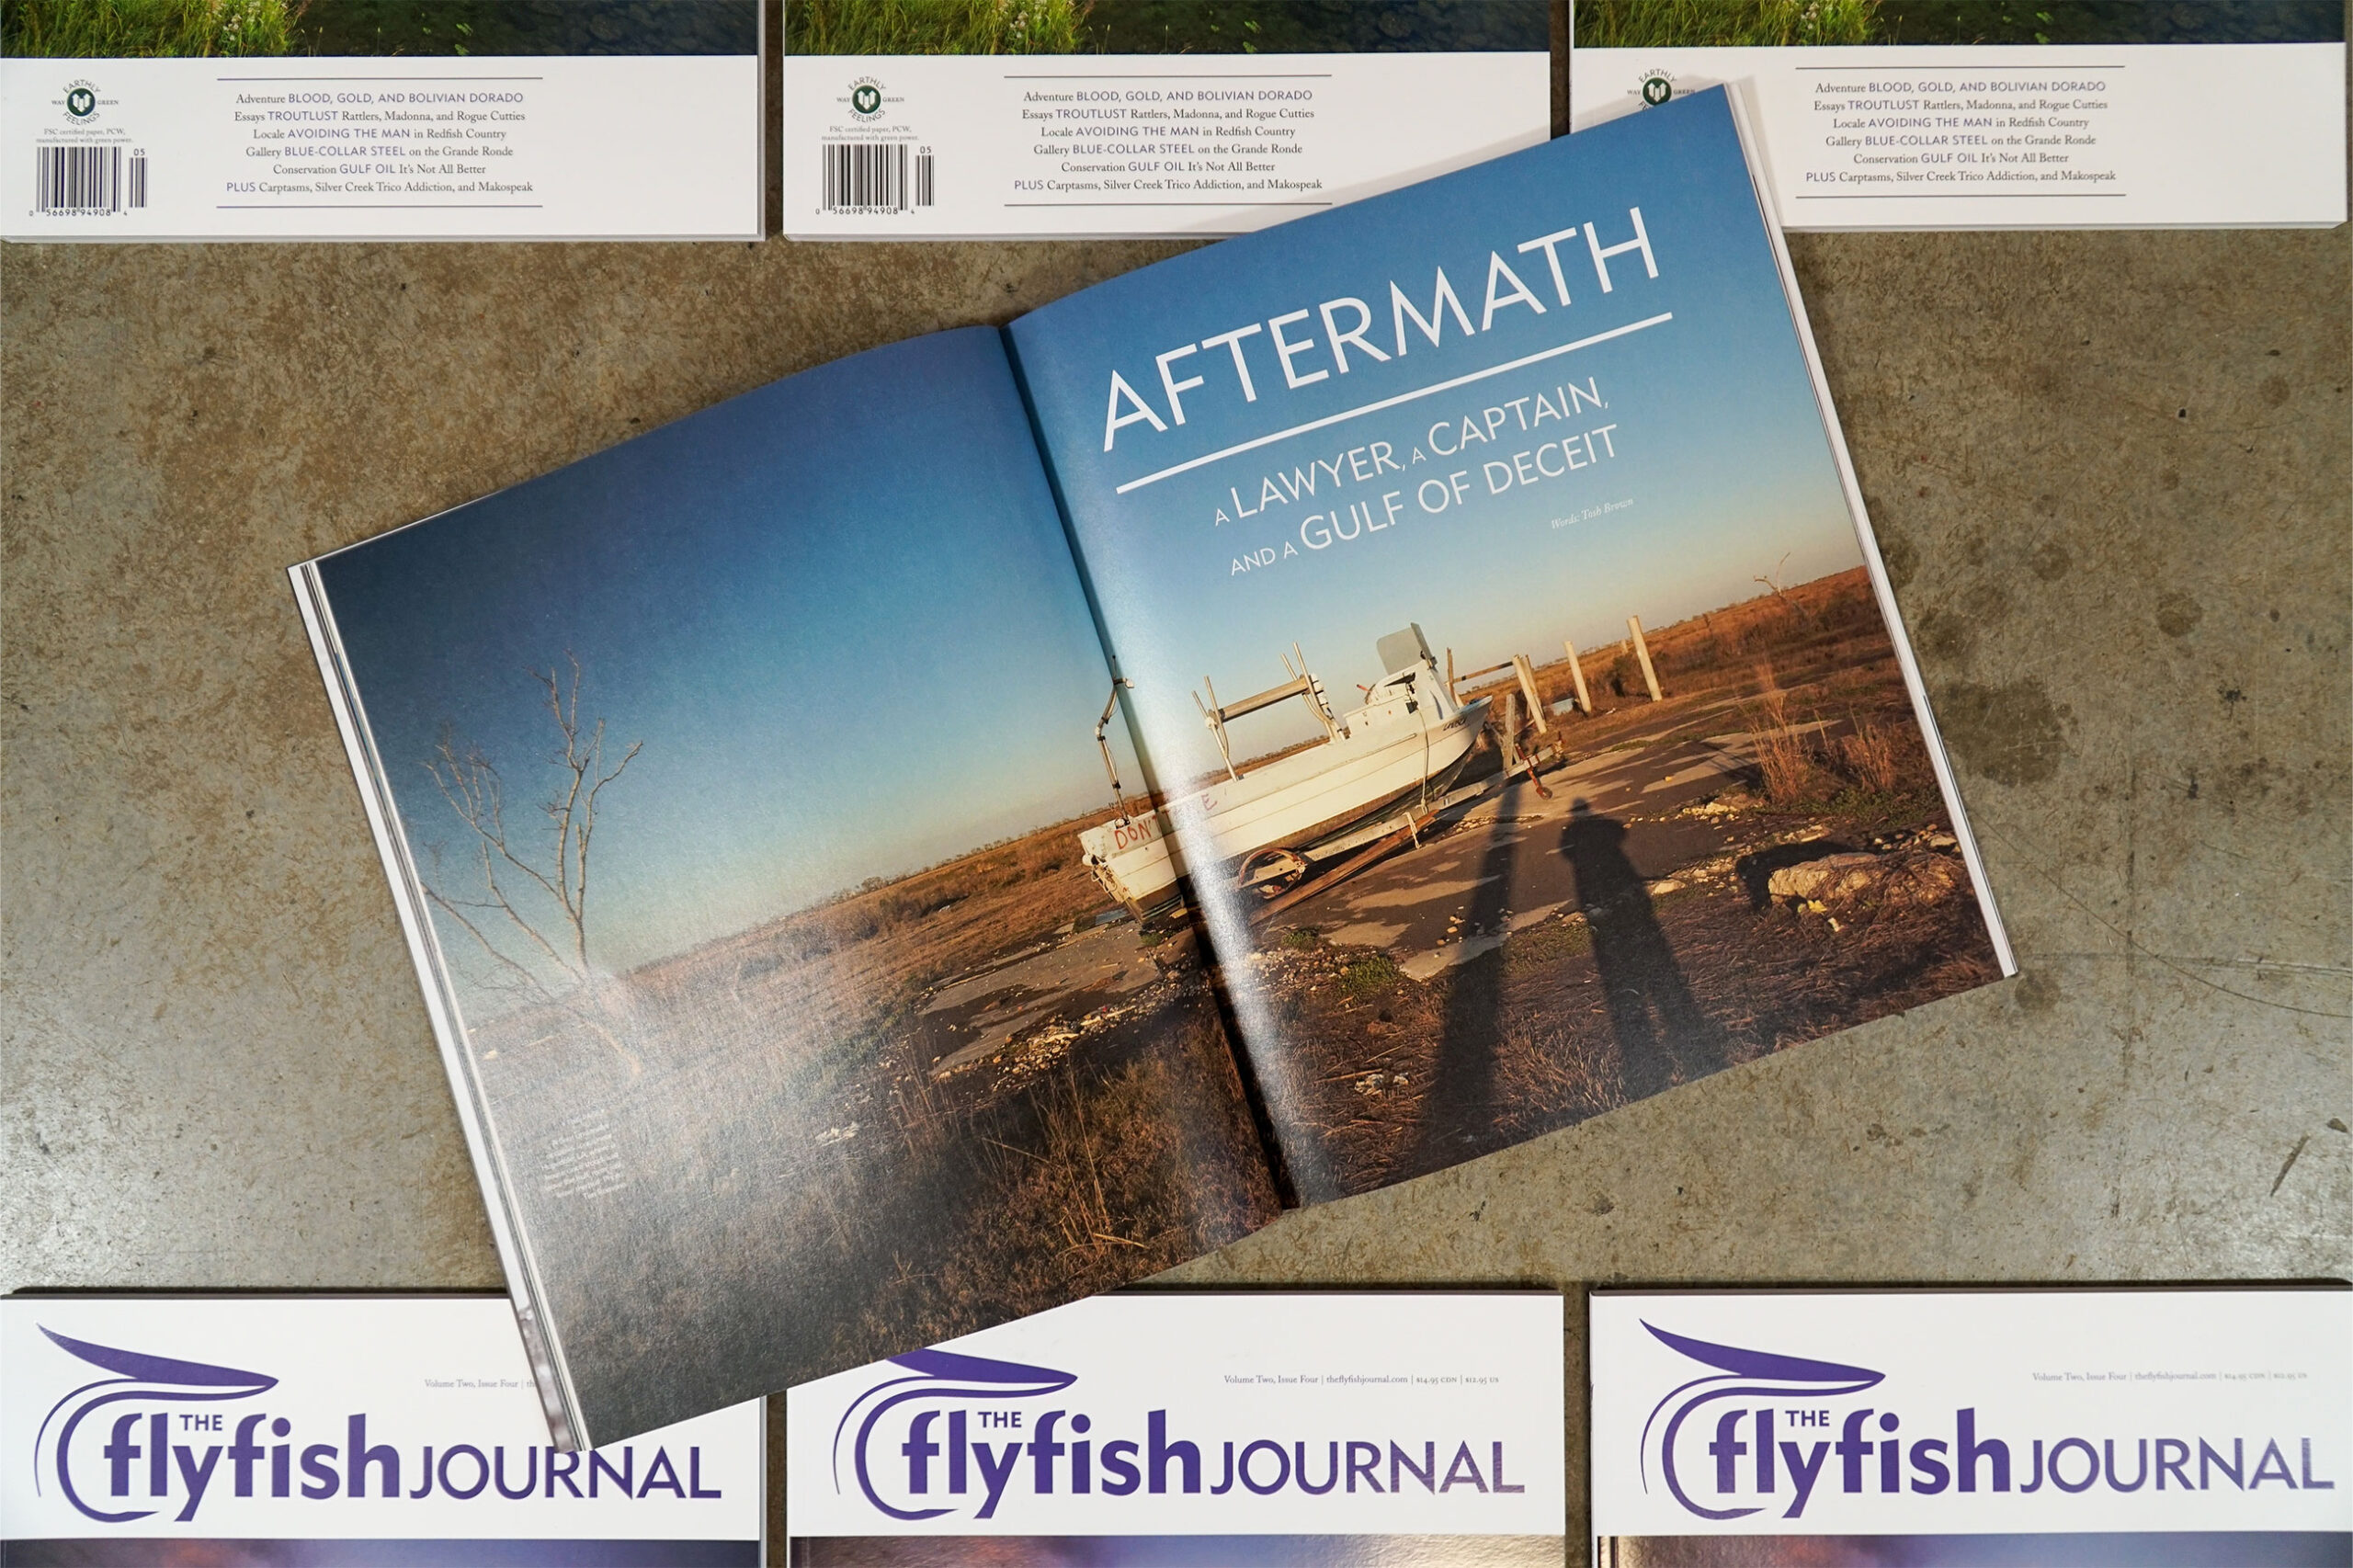 The Flyfish Journal Volume 2 Issue 4 Feature Aftermath